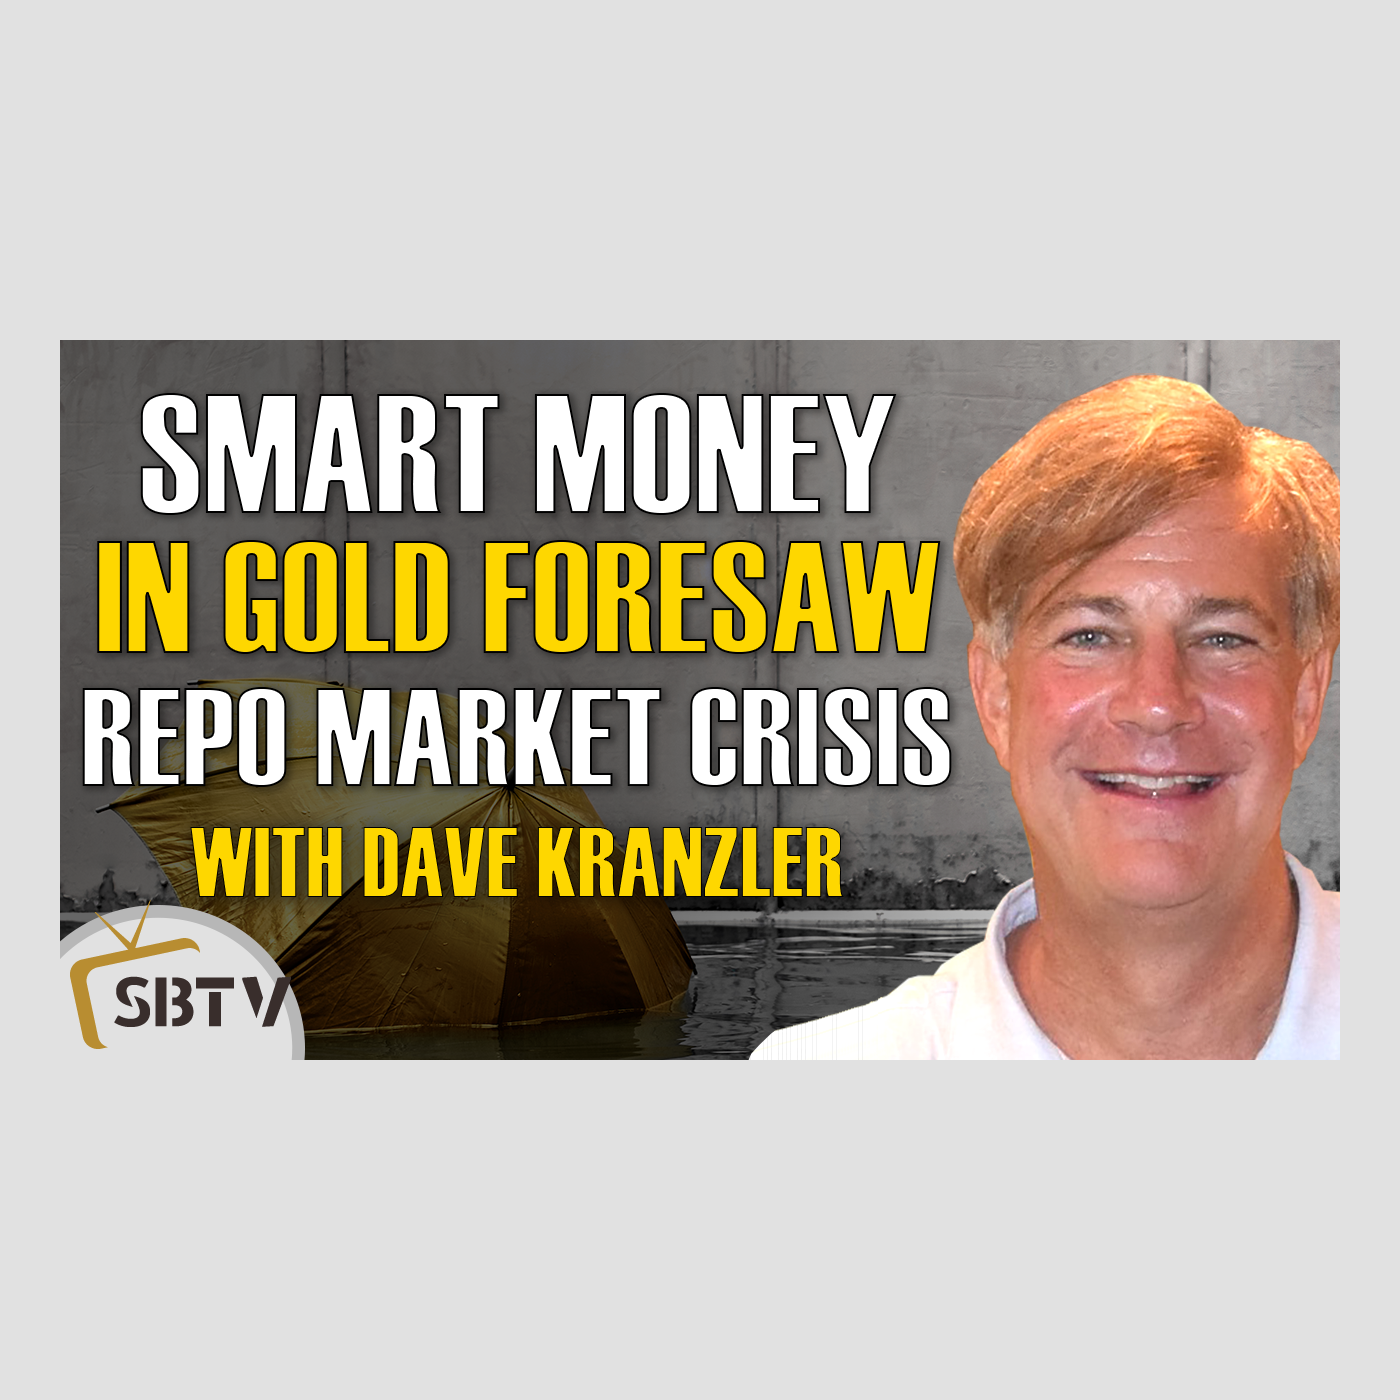 97 Dave Kranzler - Smart Money In Gold Foresaw Repo Market Crisis As Early As June 2019